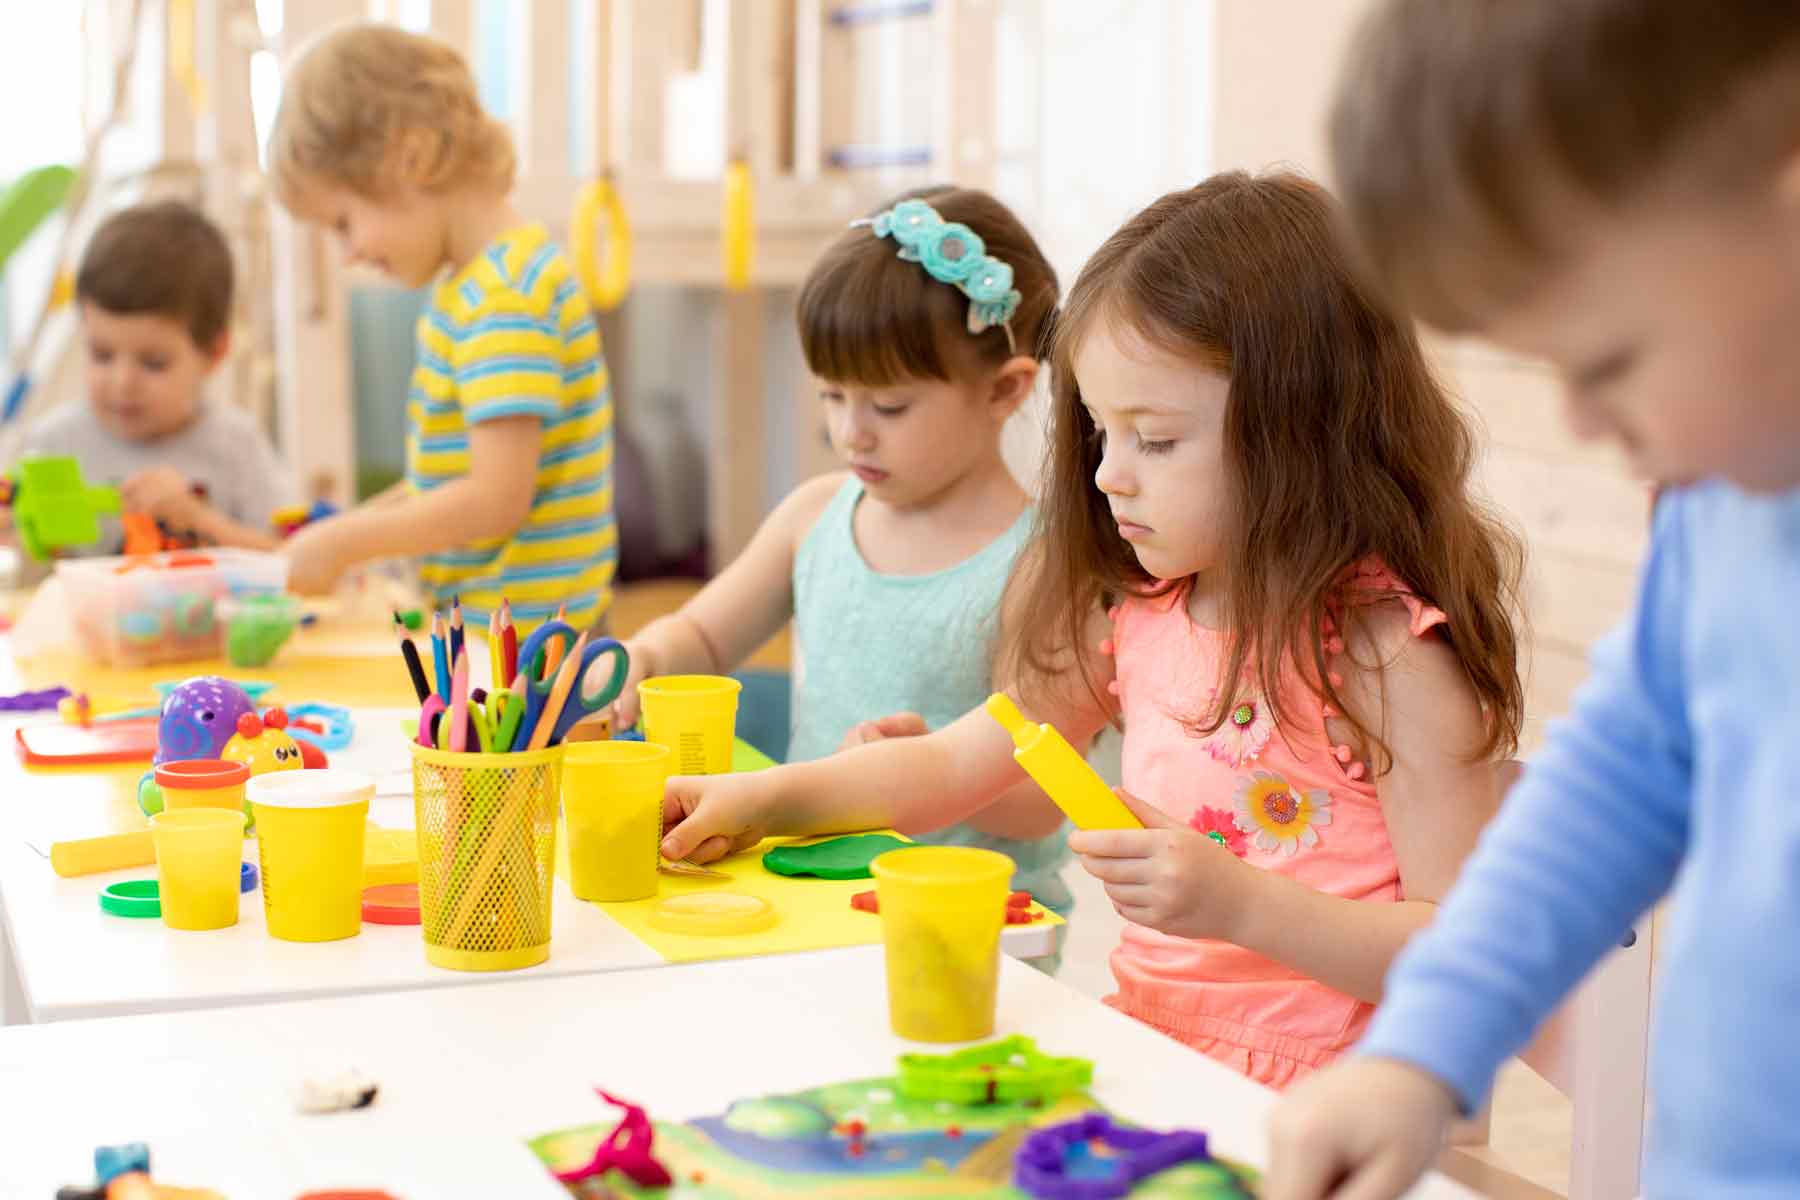 Young children working on arts and crafts in day care.